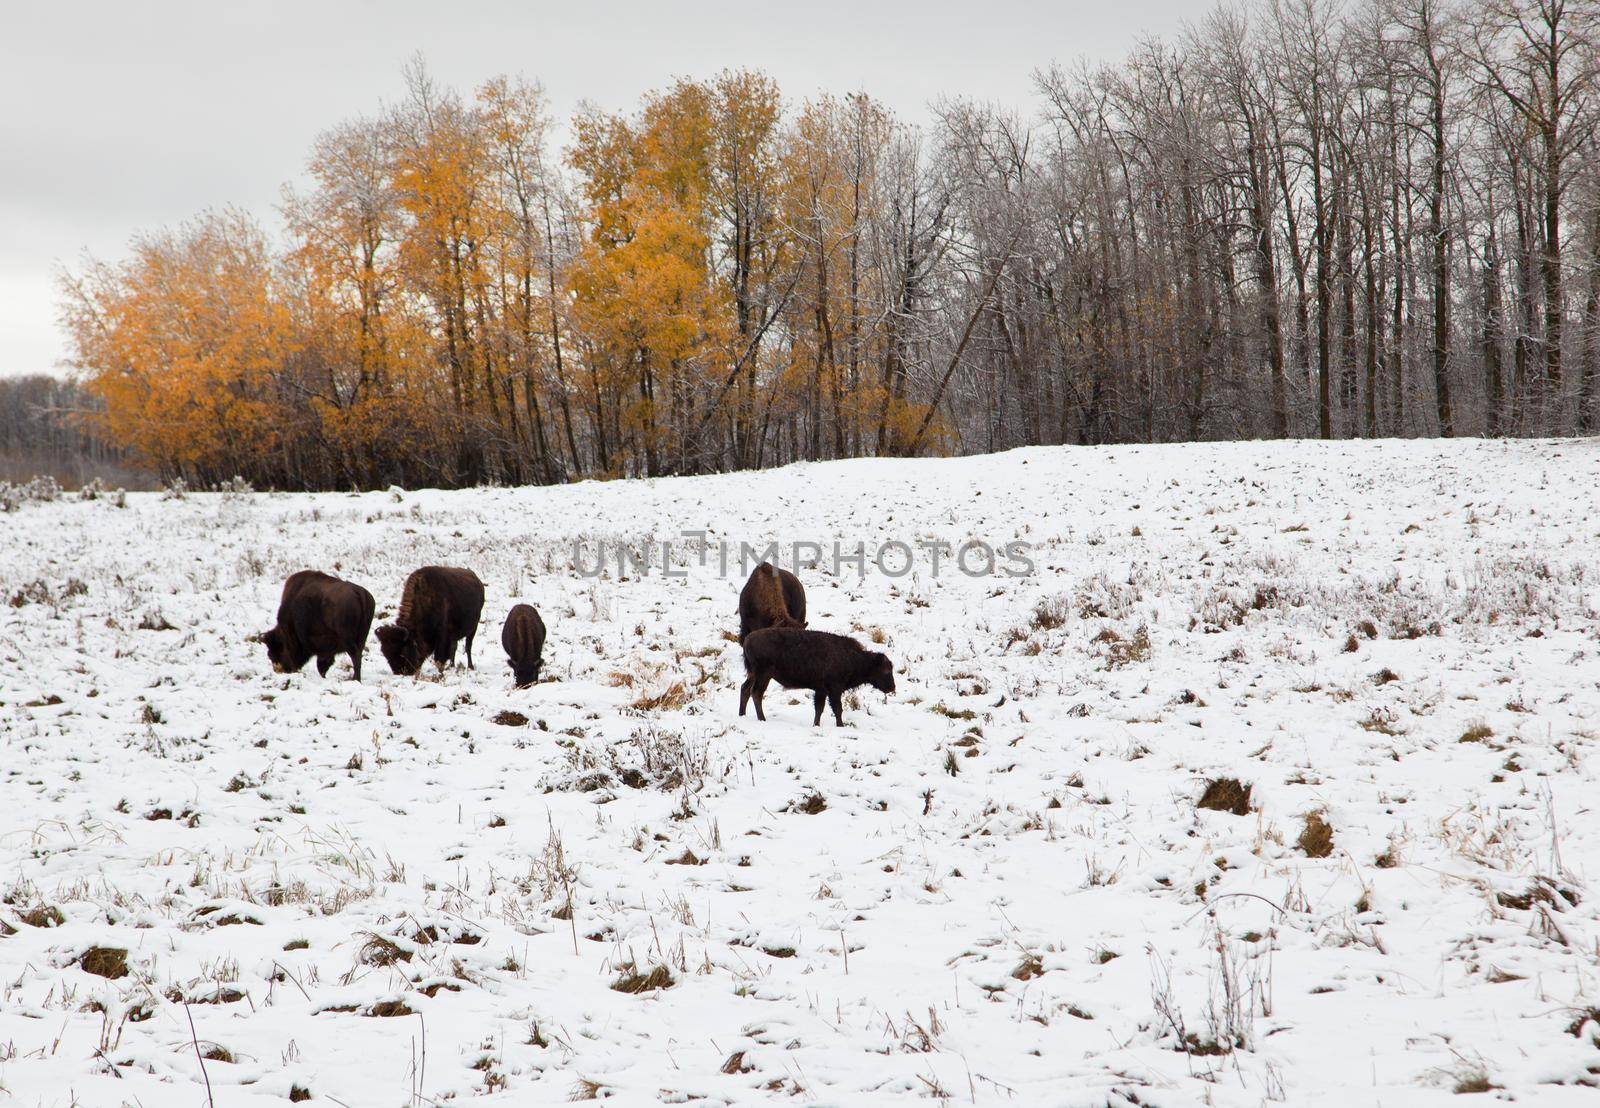 a gang of brown bison munching on grass outside in the snow, with autumn orange trees and a winter landscape at Elk Island Park in Alberta, Canada 